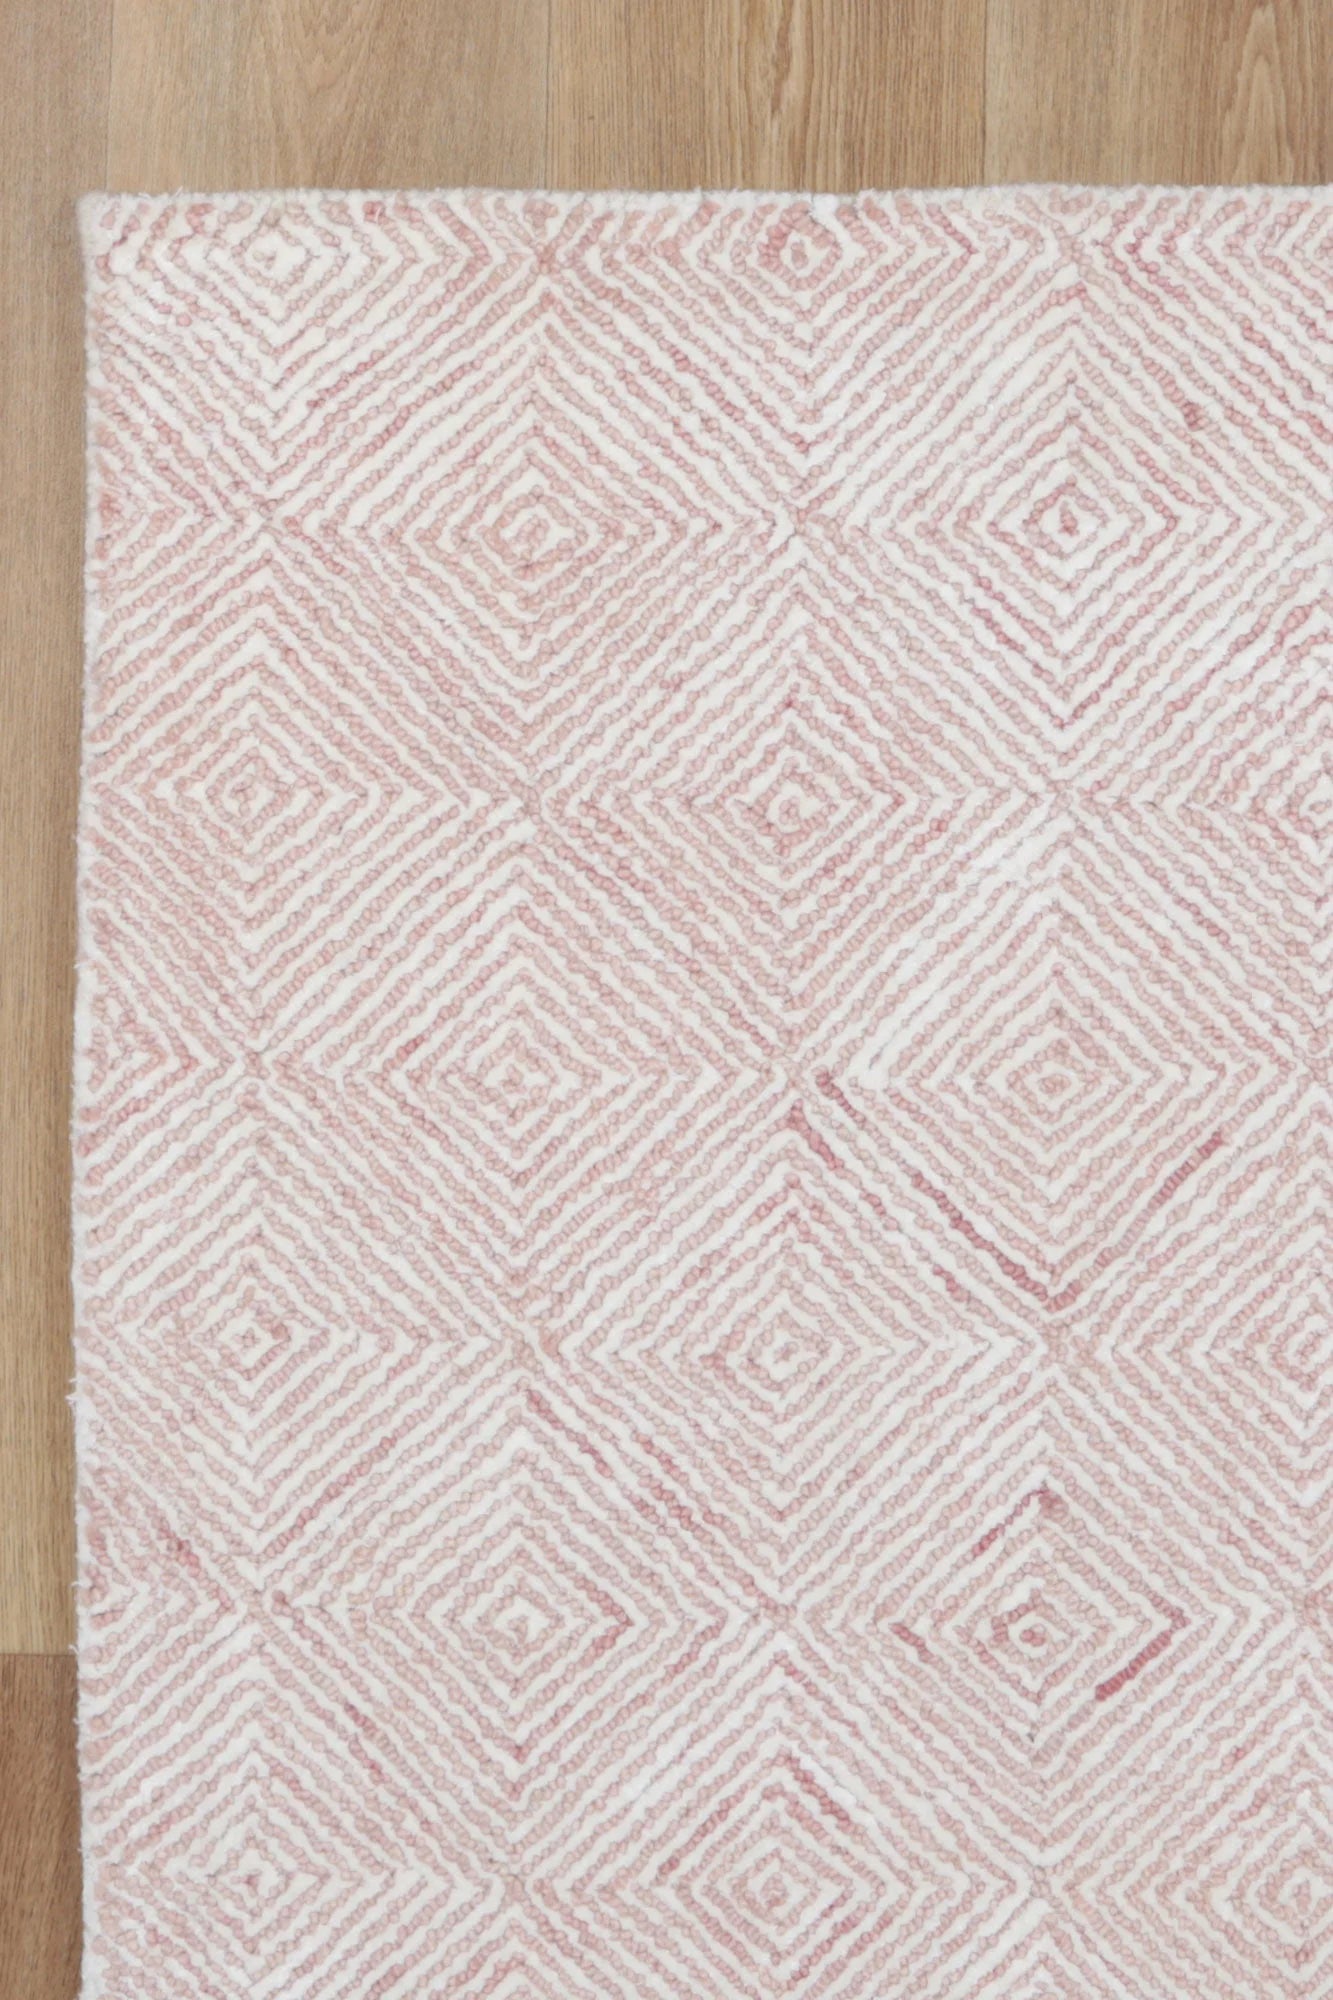 Detailed close-up of the Astrid Blush Rug's texture, emphasizing the softness and quality of the wool and viscose blend.